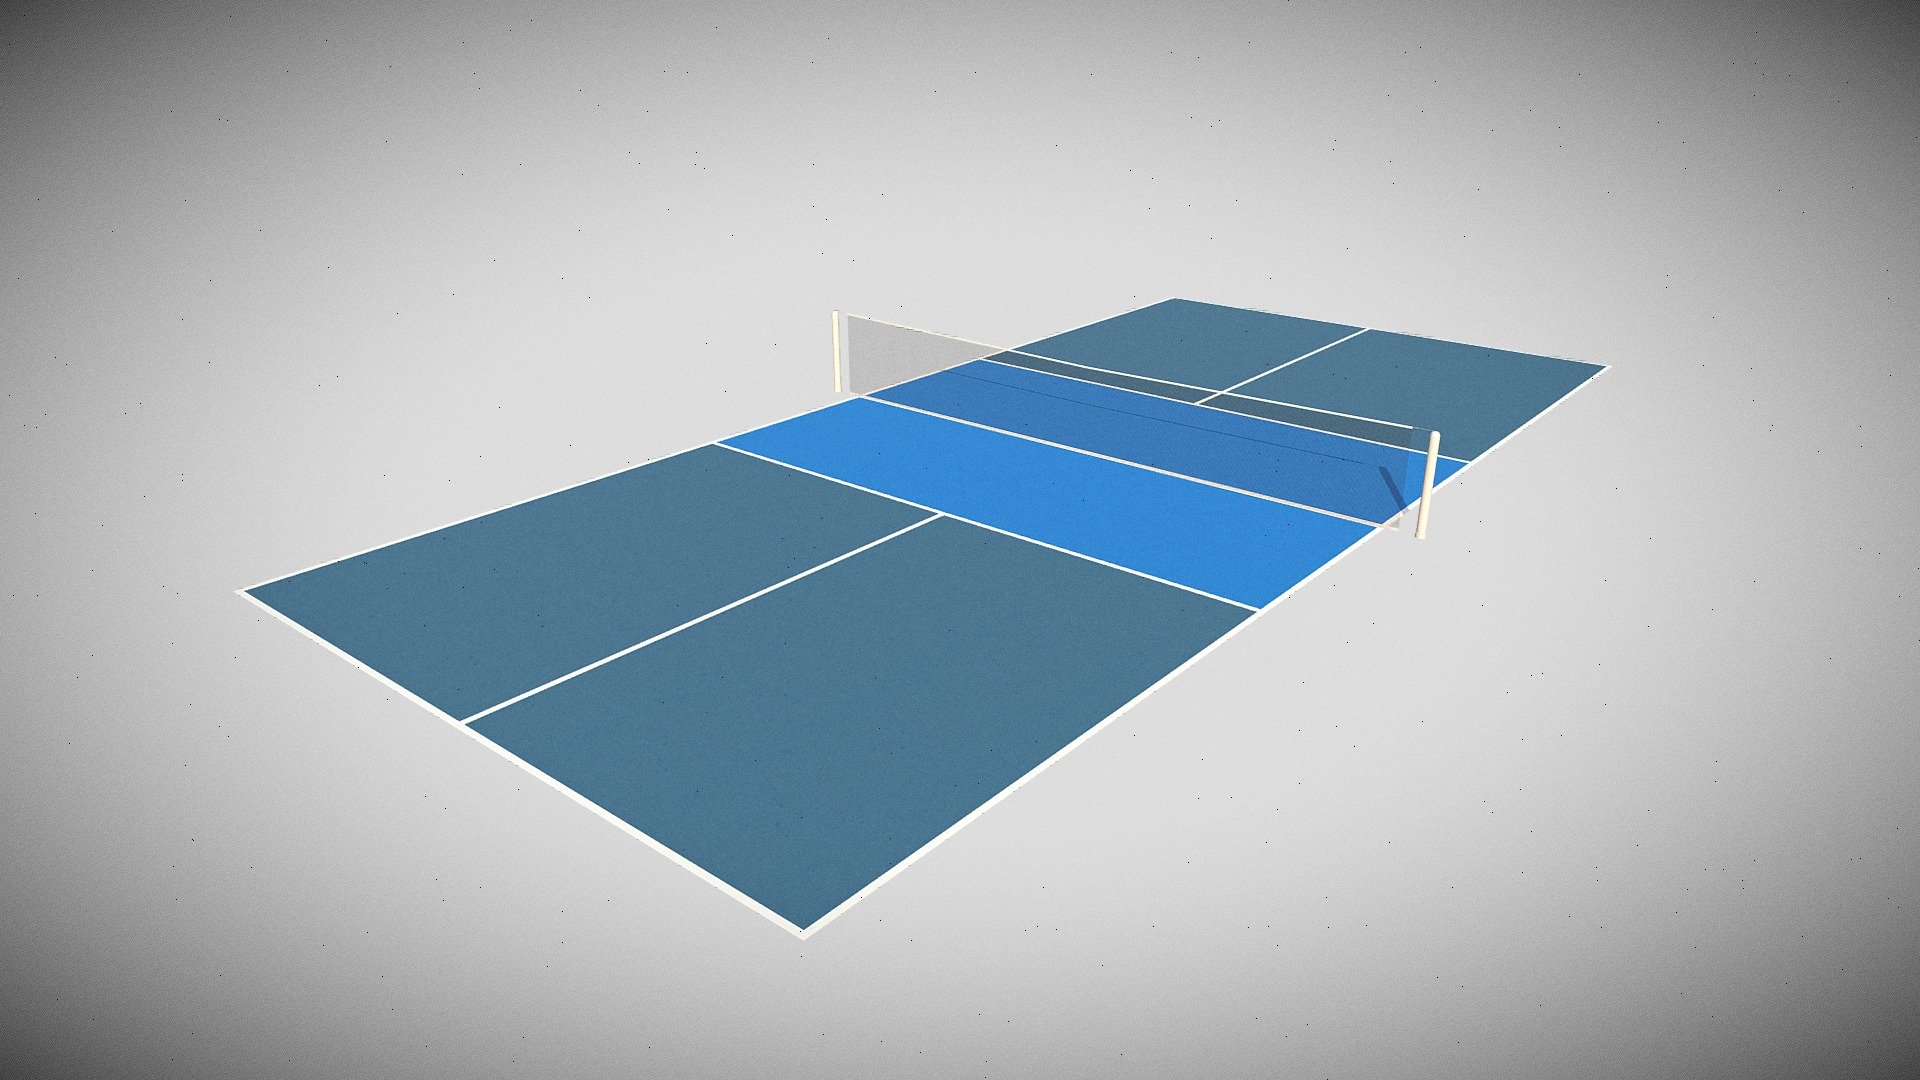 This 3D model depicts a simplified pickleball court, suitable for a variety of digital projects.

Minimalist 3D Pickleball Court Model - Ideal for game development, architectural visualizations, and digital animations. This model presents a stylized representation of a Pickleball court, featuring a two-tone blue surface with accurately proportioned lines and a simple, sleek net. The design is optimized for easy integration into various digital environments, offering both low-poly efficiency for real-time applications and sufficient detail for close-up renders.